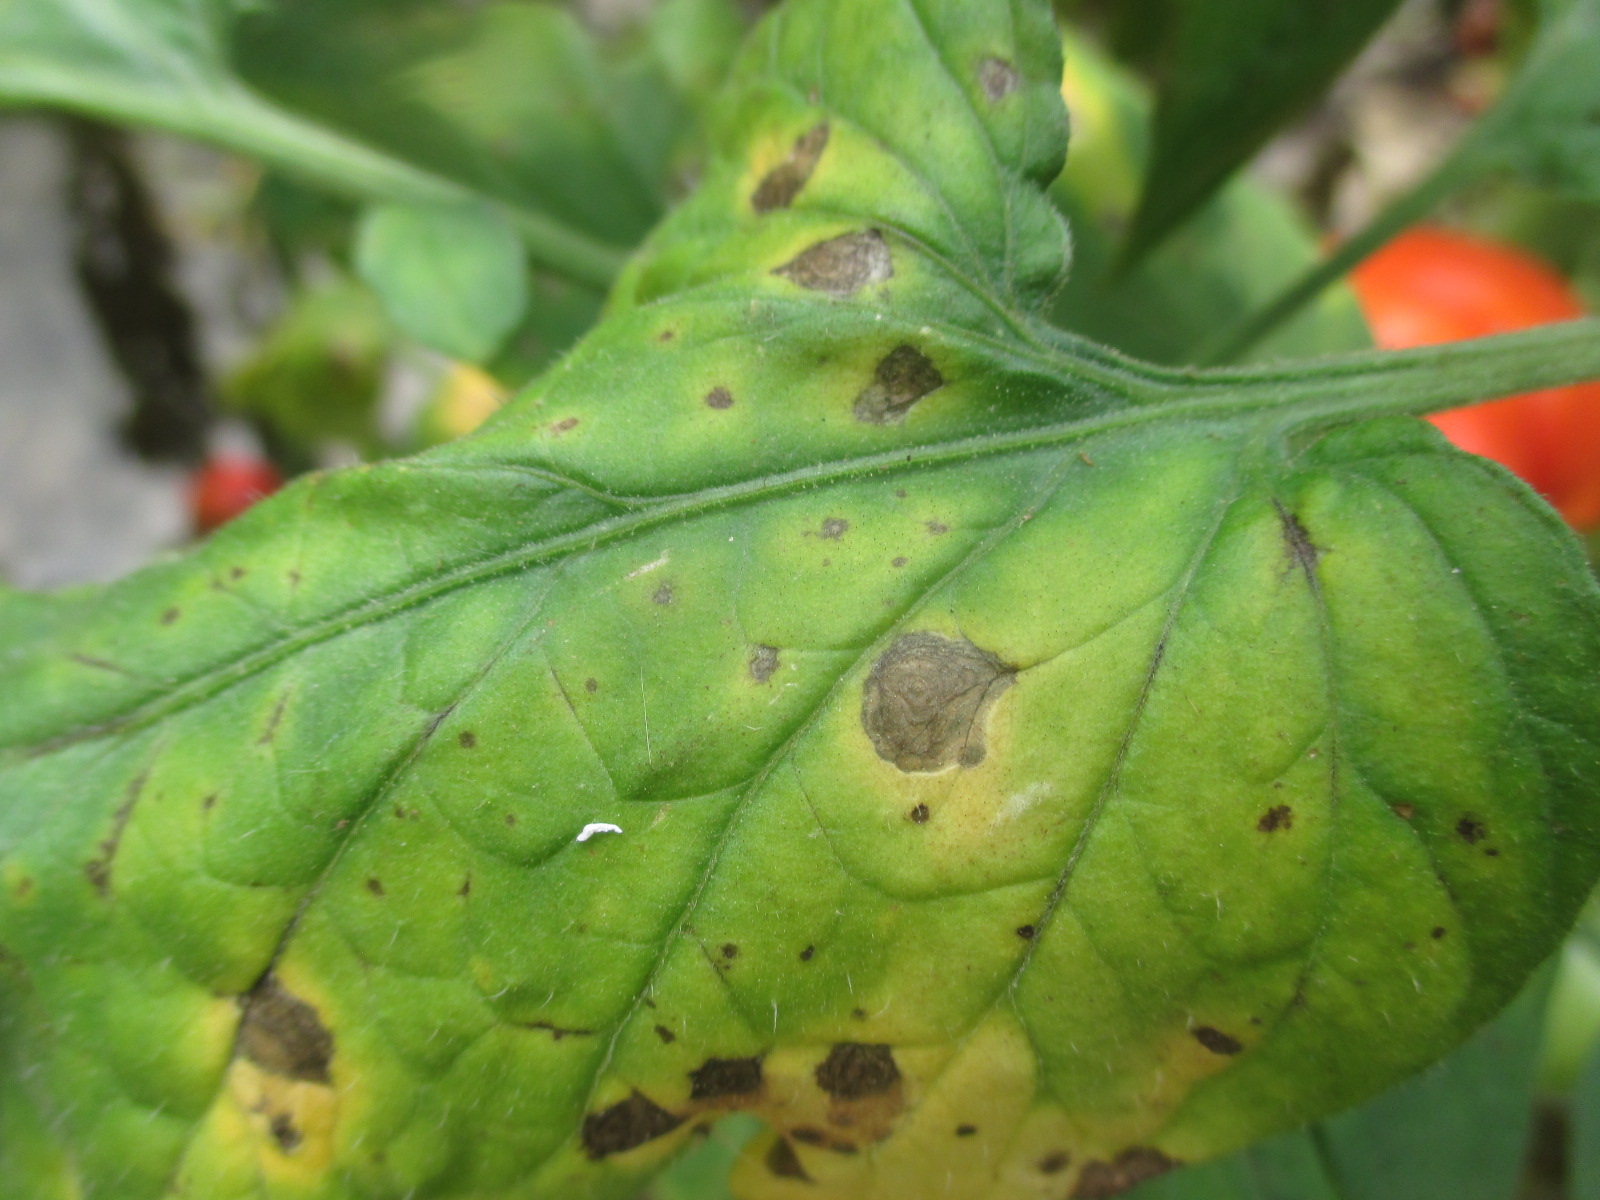 Figure 1. Target spot of tomato (Photo by Wenjing Guan).